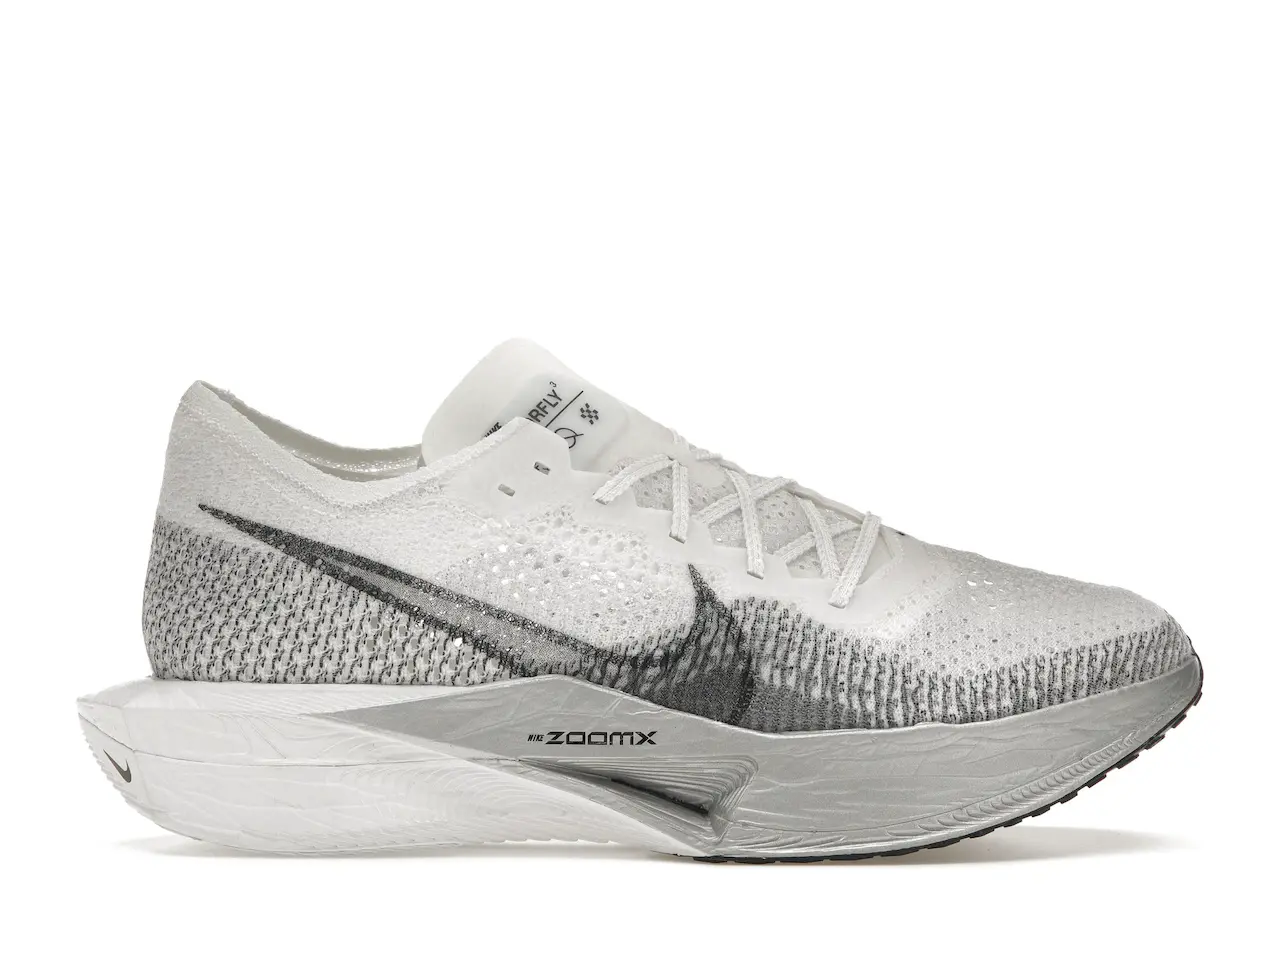 Nike ZoomX Vaporfly 3 White Particle Grey Men's - DV4129-100 - US